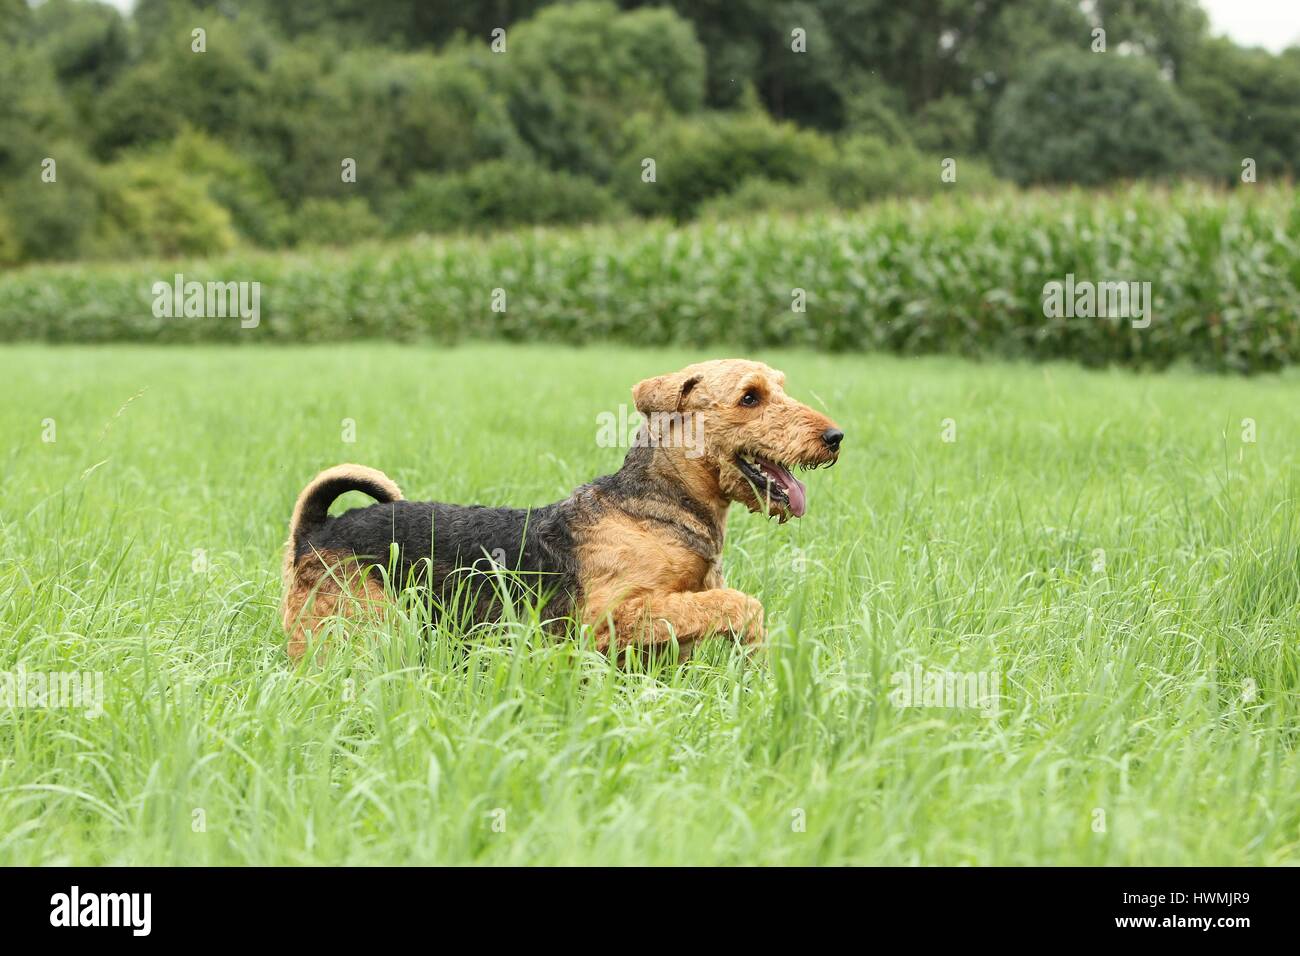 Camminare Airedale Terrier Foto Stock